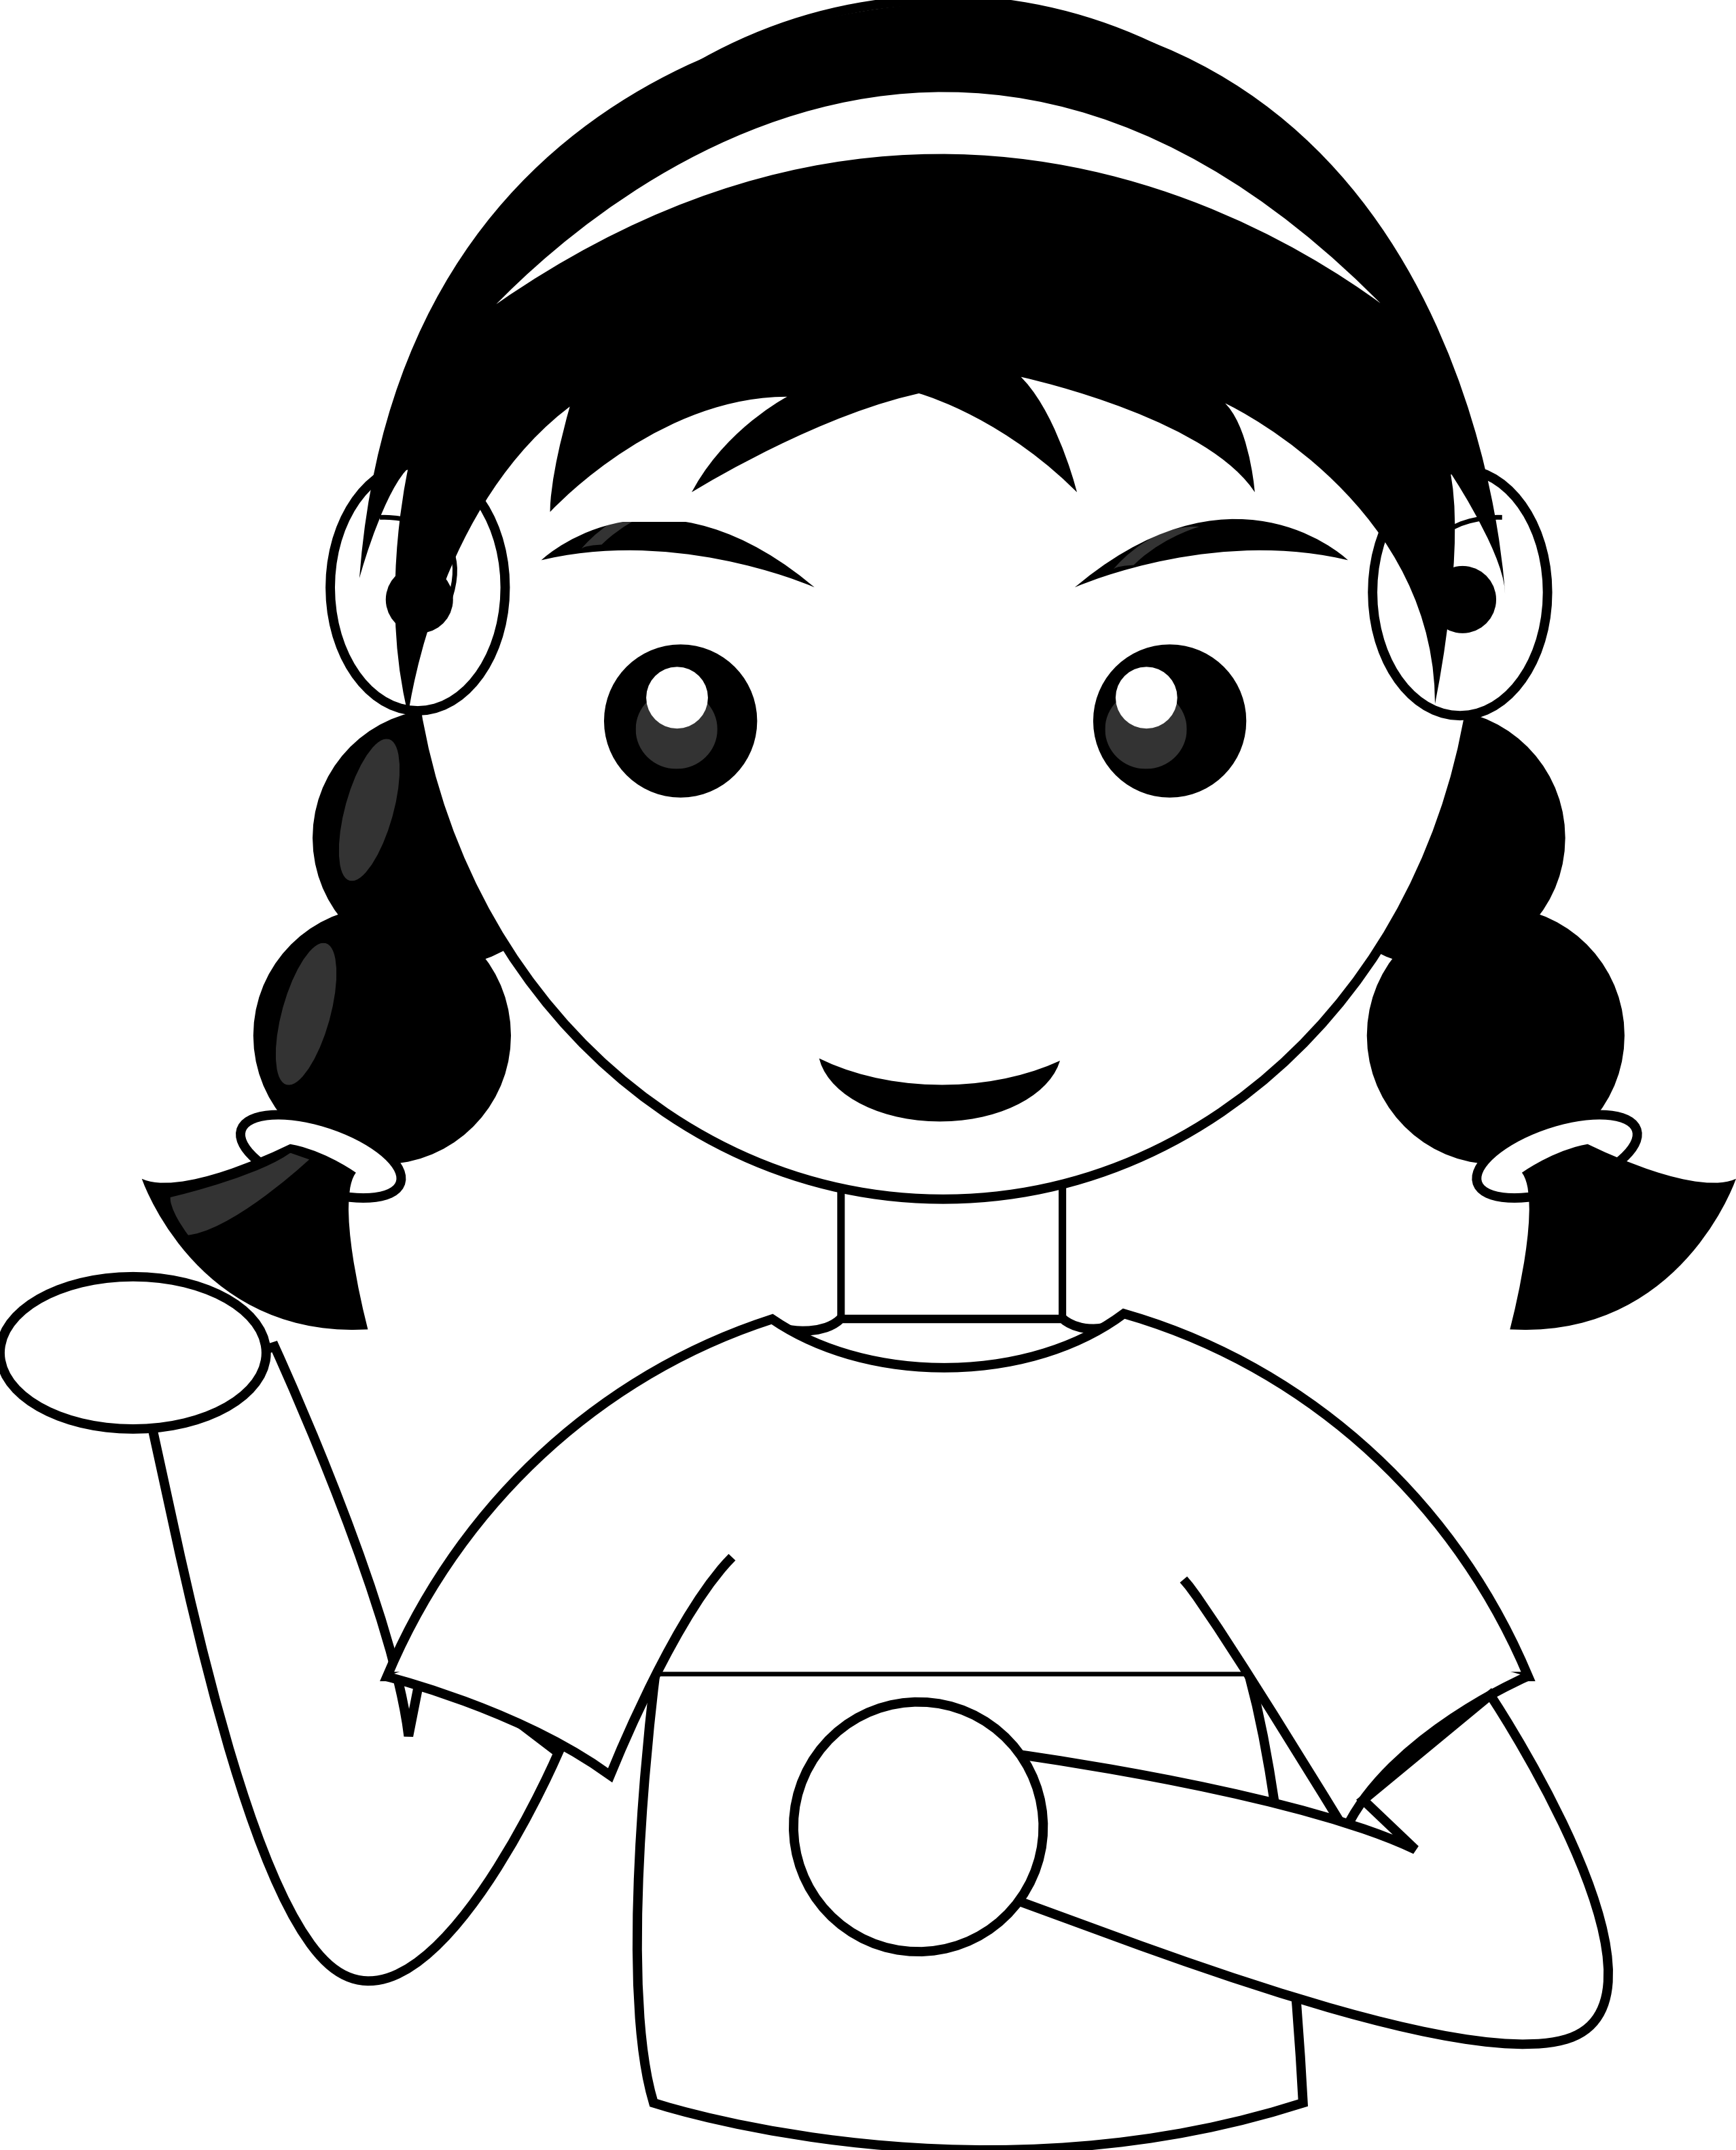 Black and white clipart of girls.